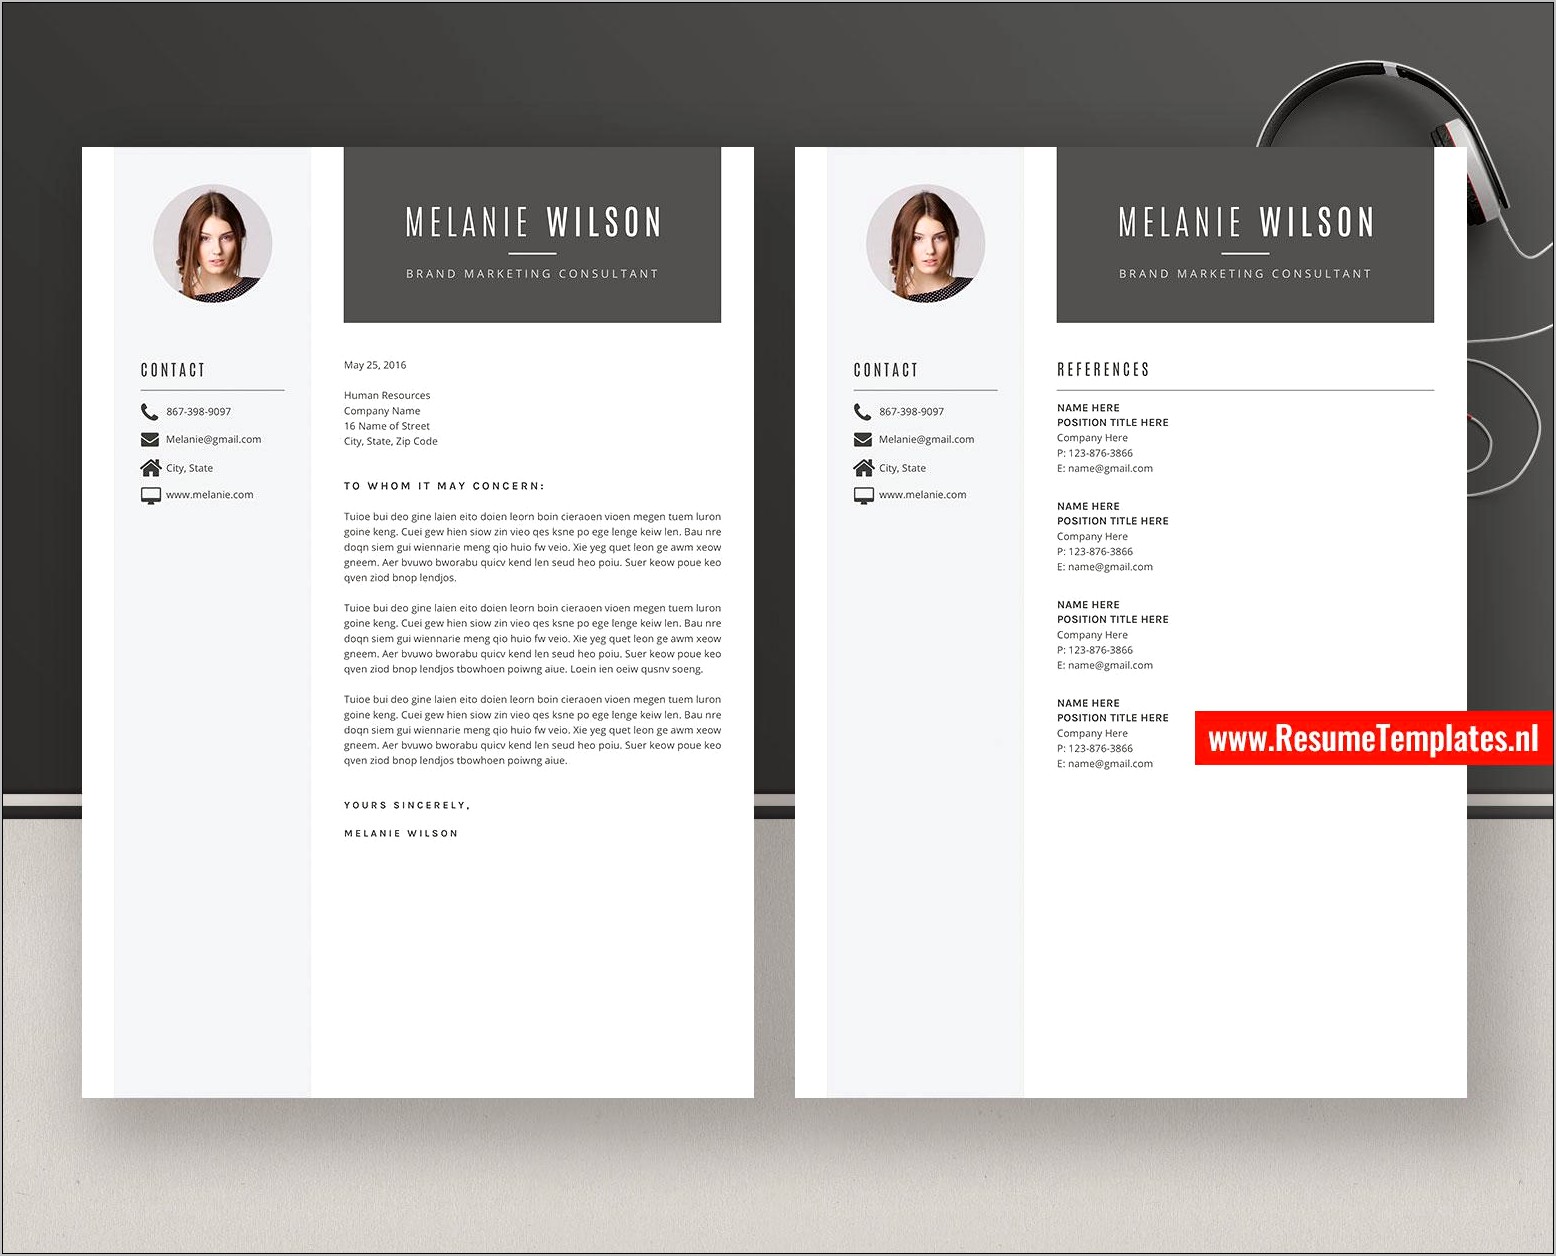 Microsoft Word Resume With References Template Resume Example Gallery 4125